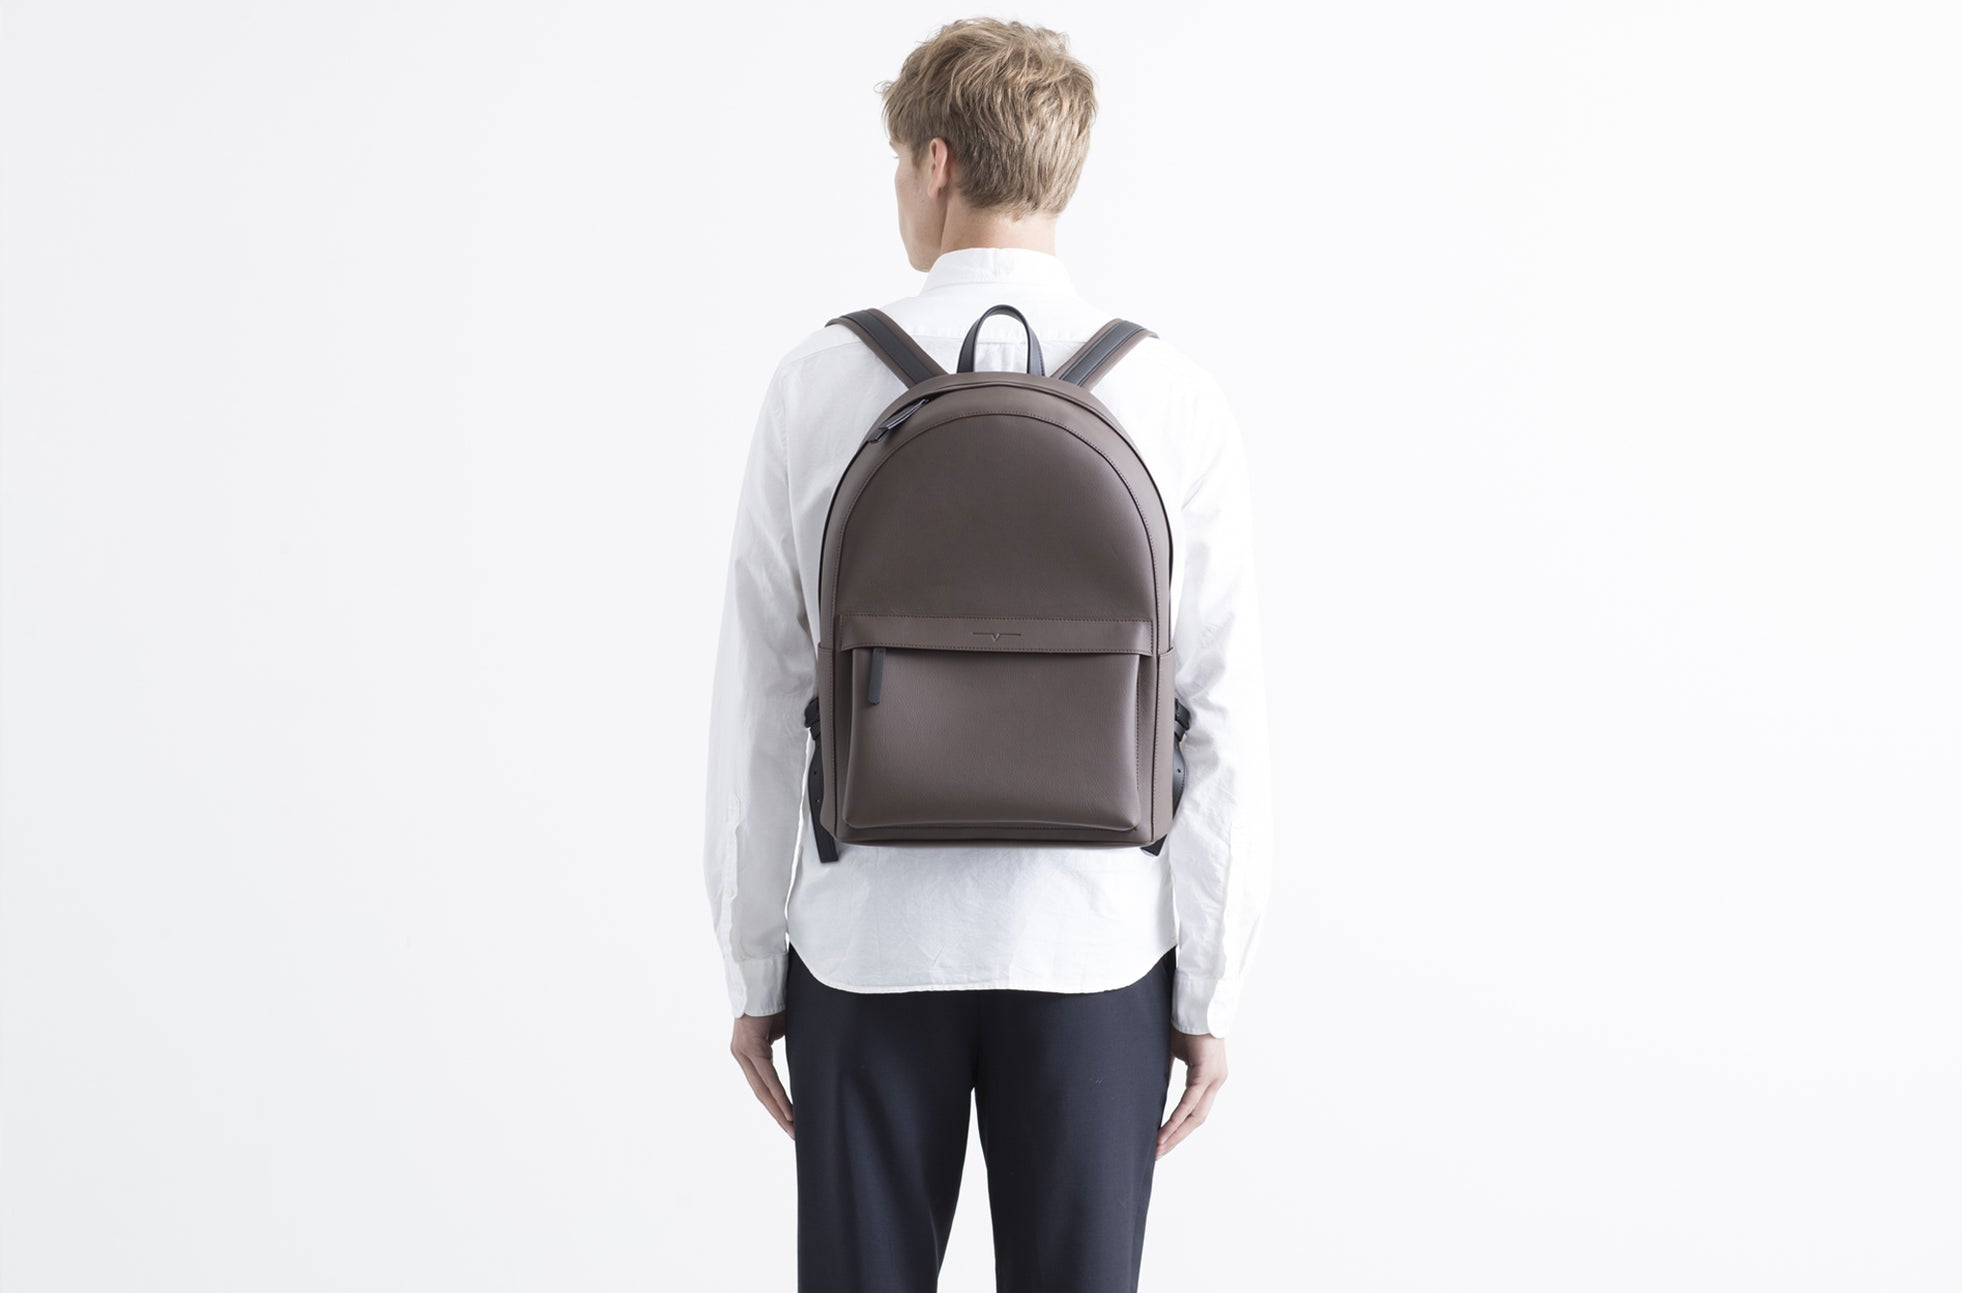 The Classic Backpack in Technik in Taupe and Black image 9